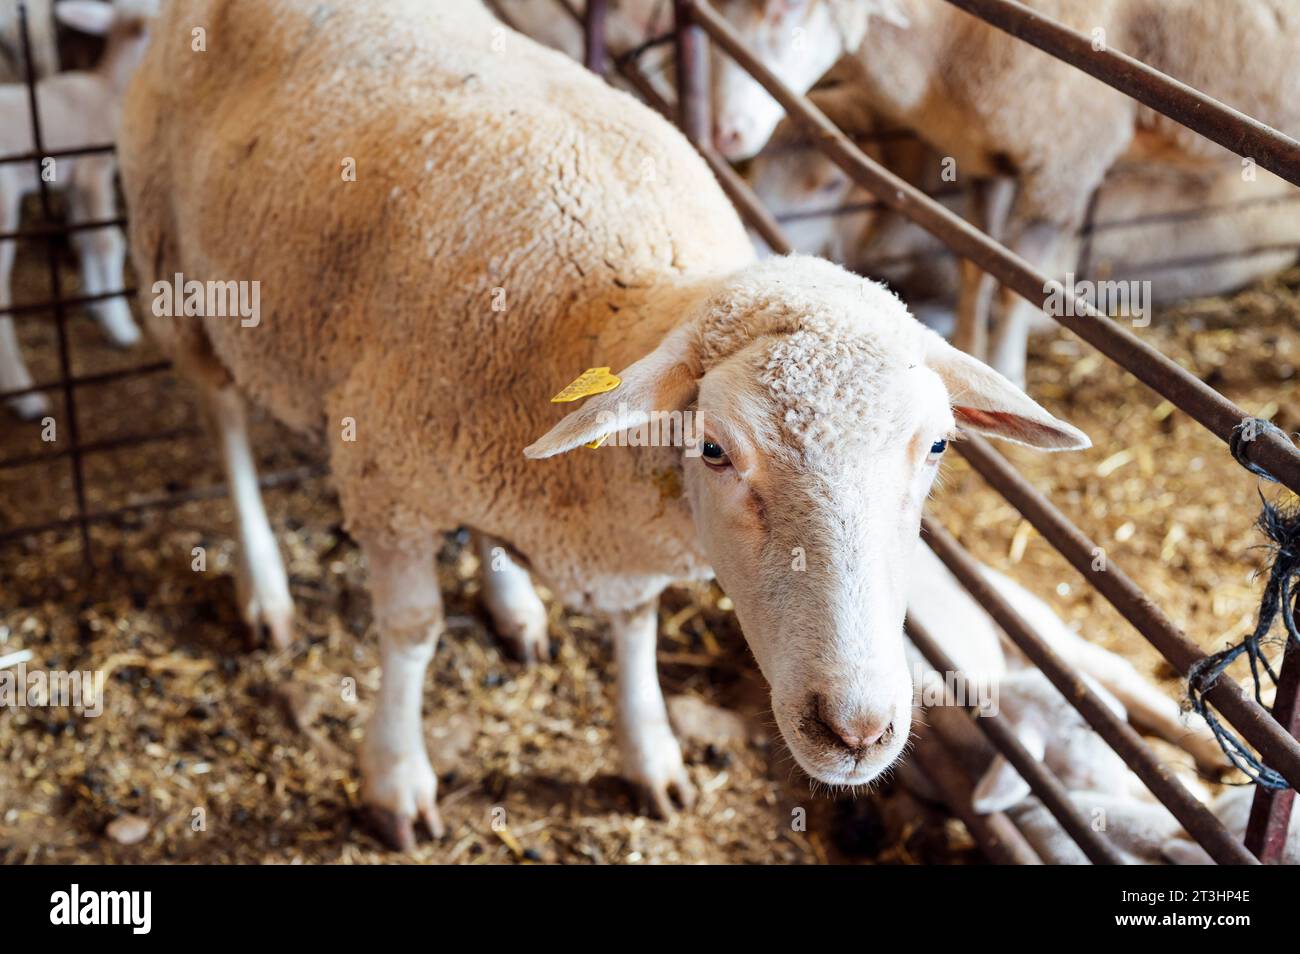 sheep looking in the stable Stock Photo